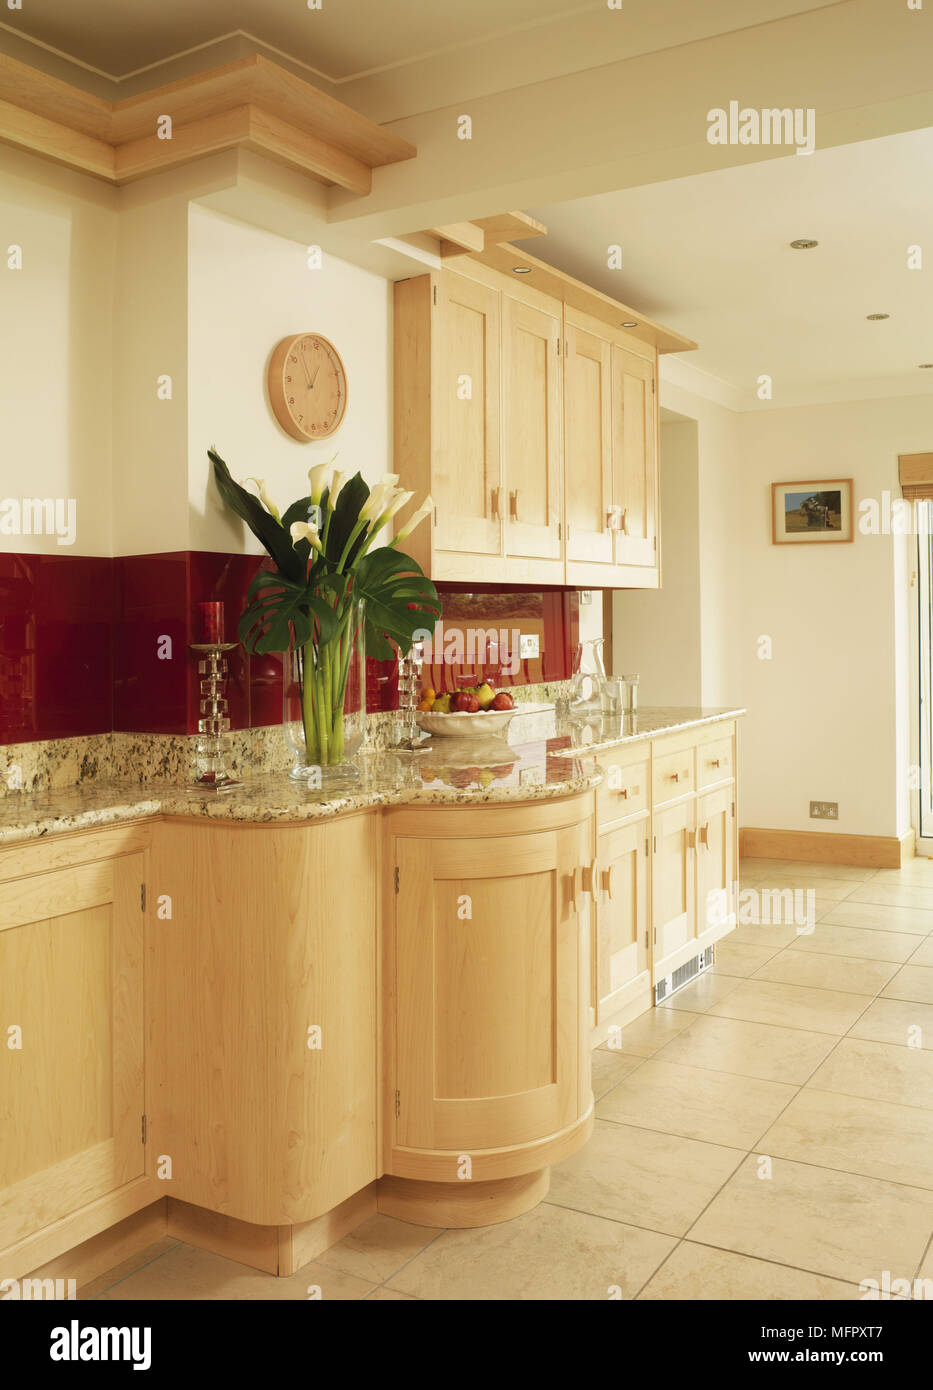 Kitchen with fitted units and tiled floor Stock Photo